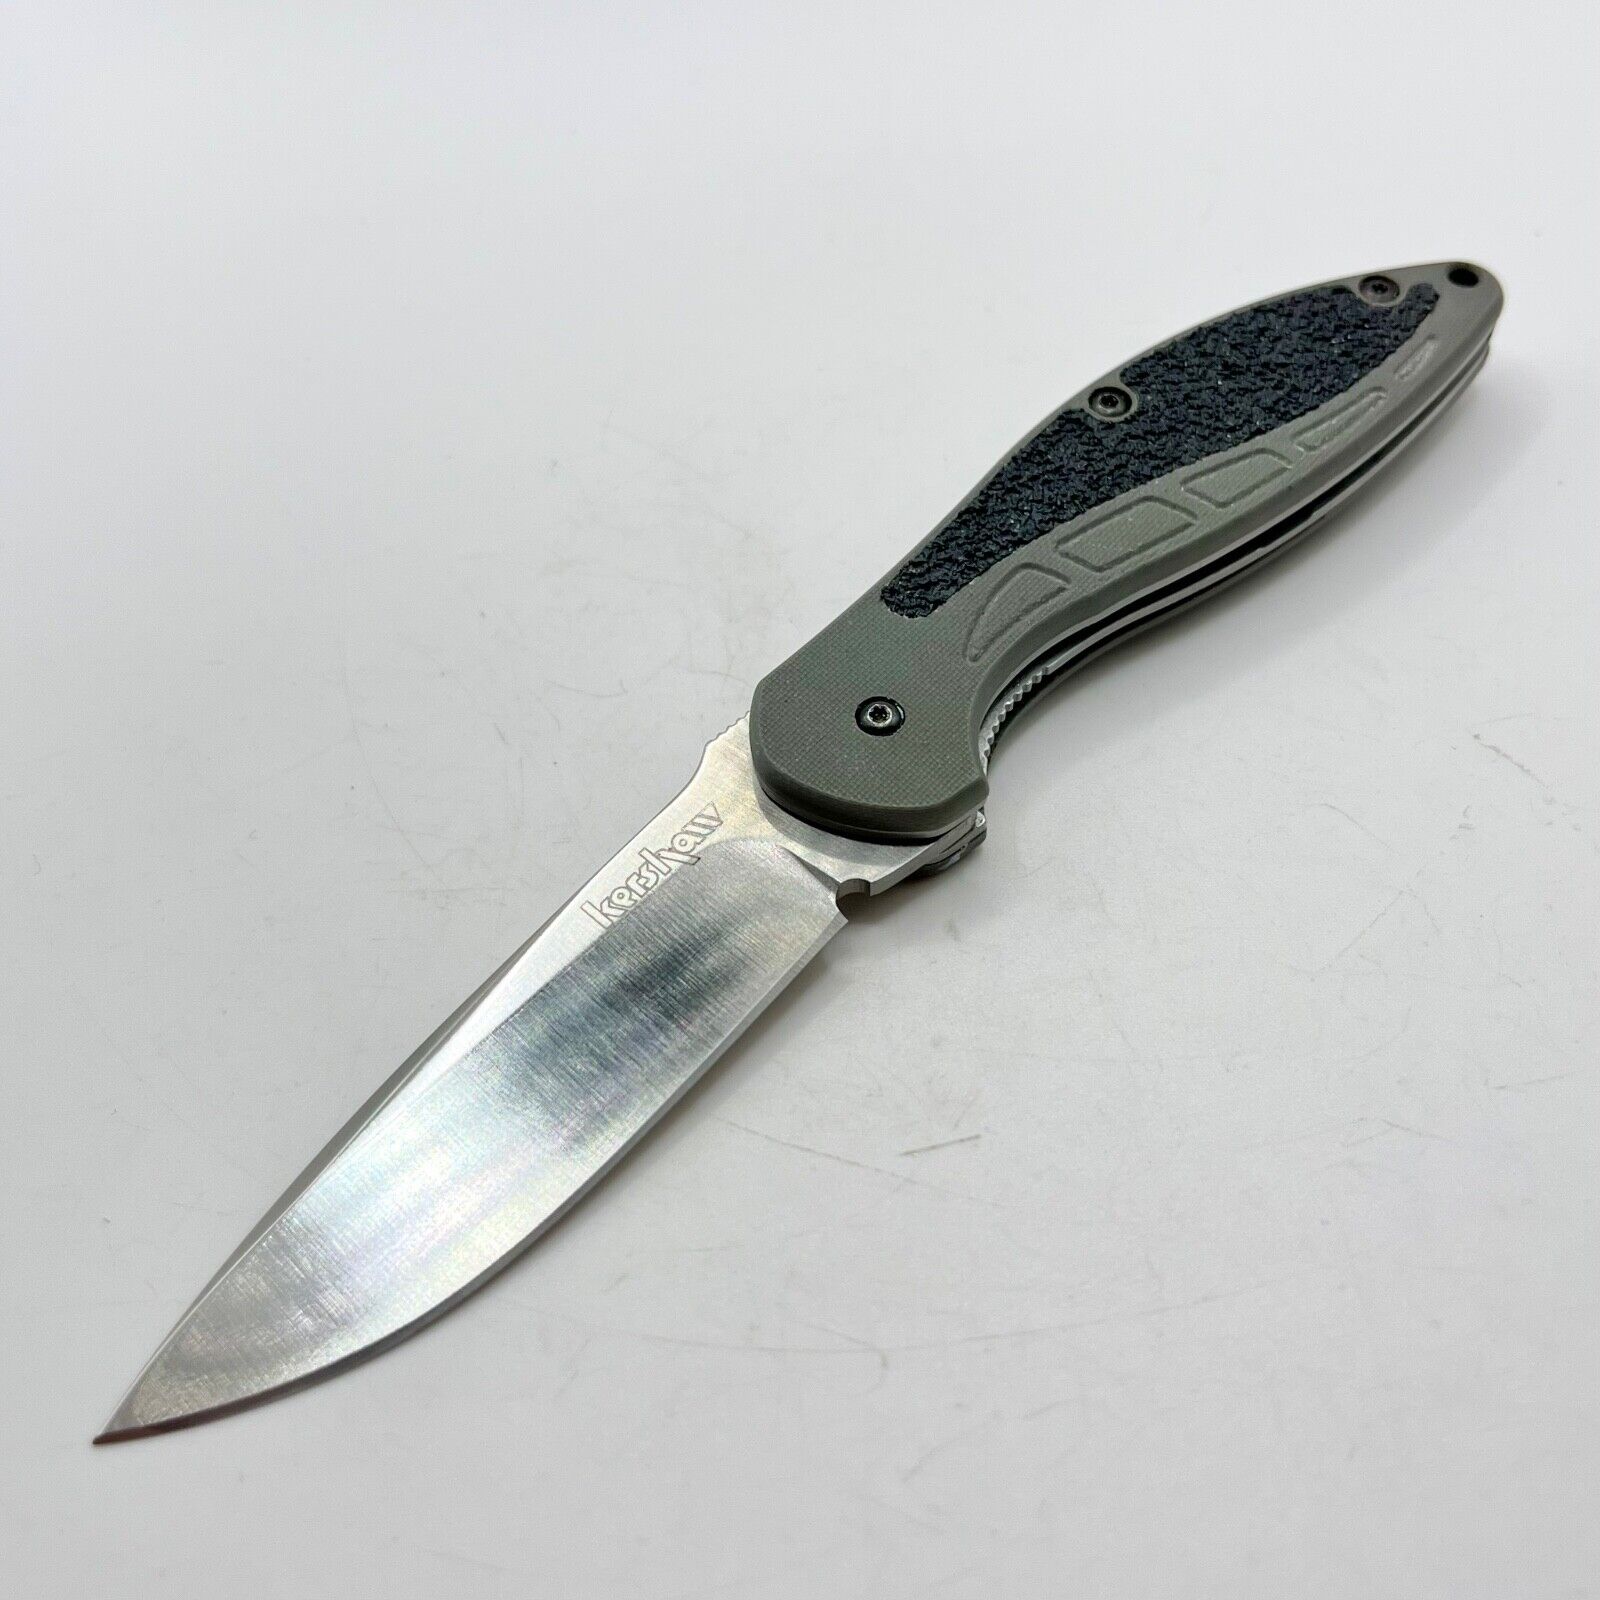 Kershaw 1745 ENER-G NRG - FIRST PRODUCTION Pocket Knife Limited Edition - RARE